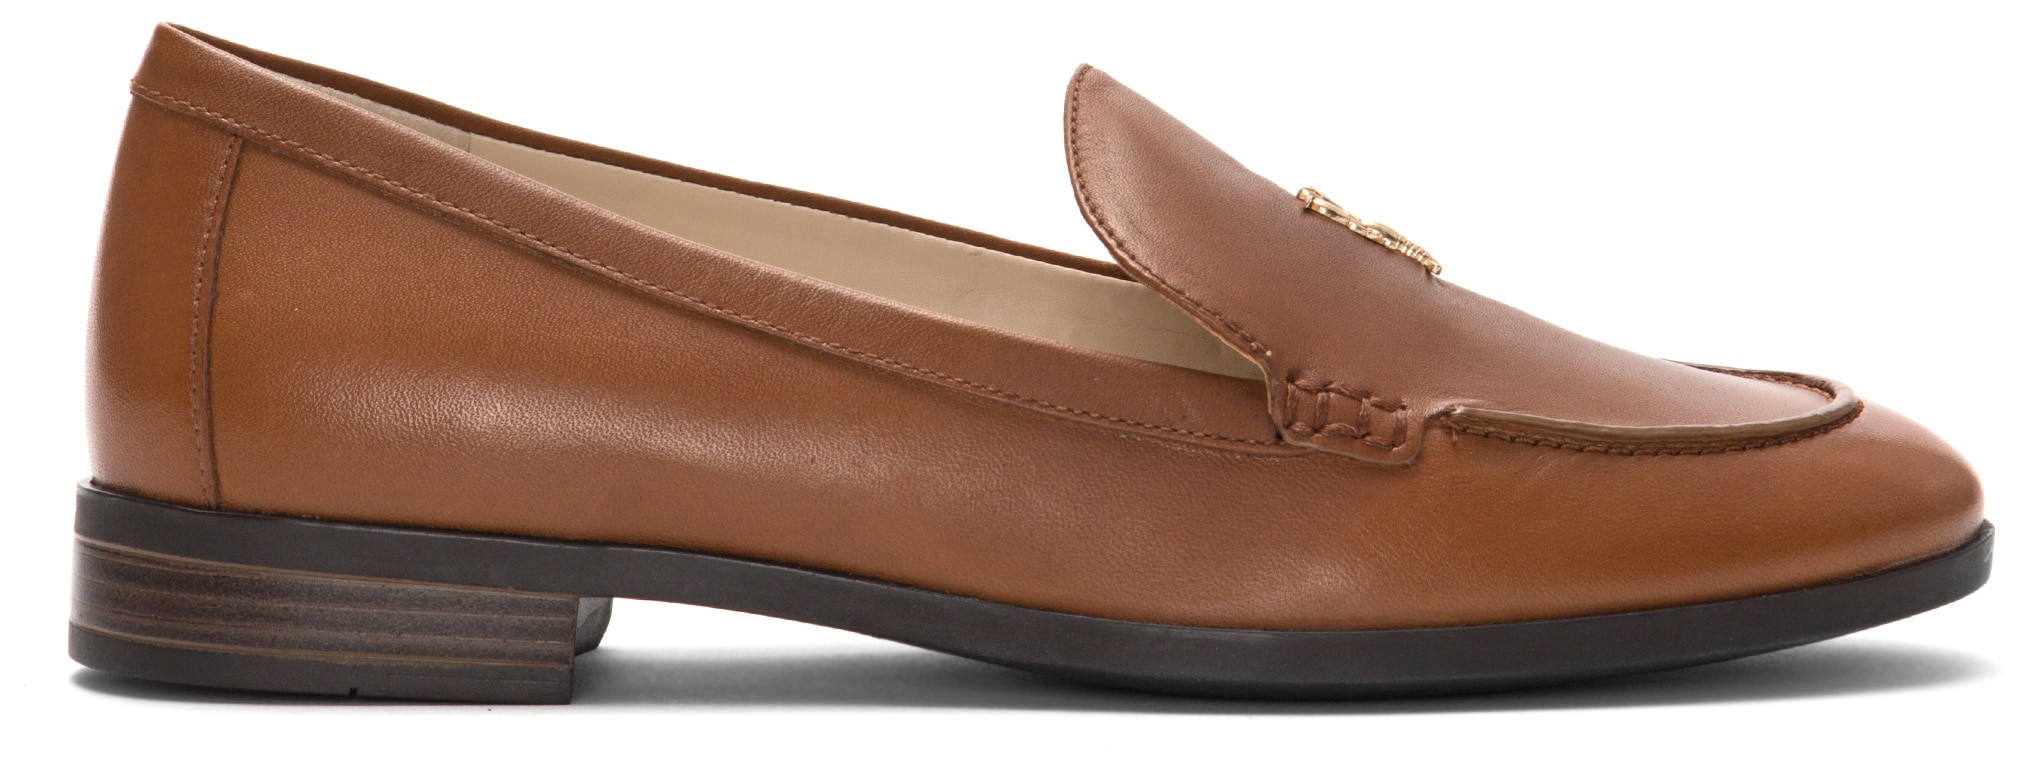 cole haan lobster pinch loafer